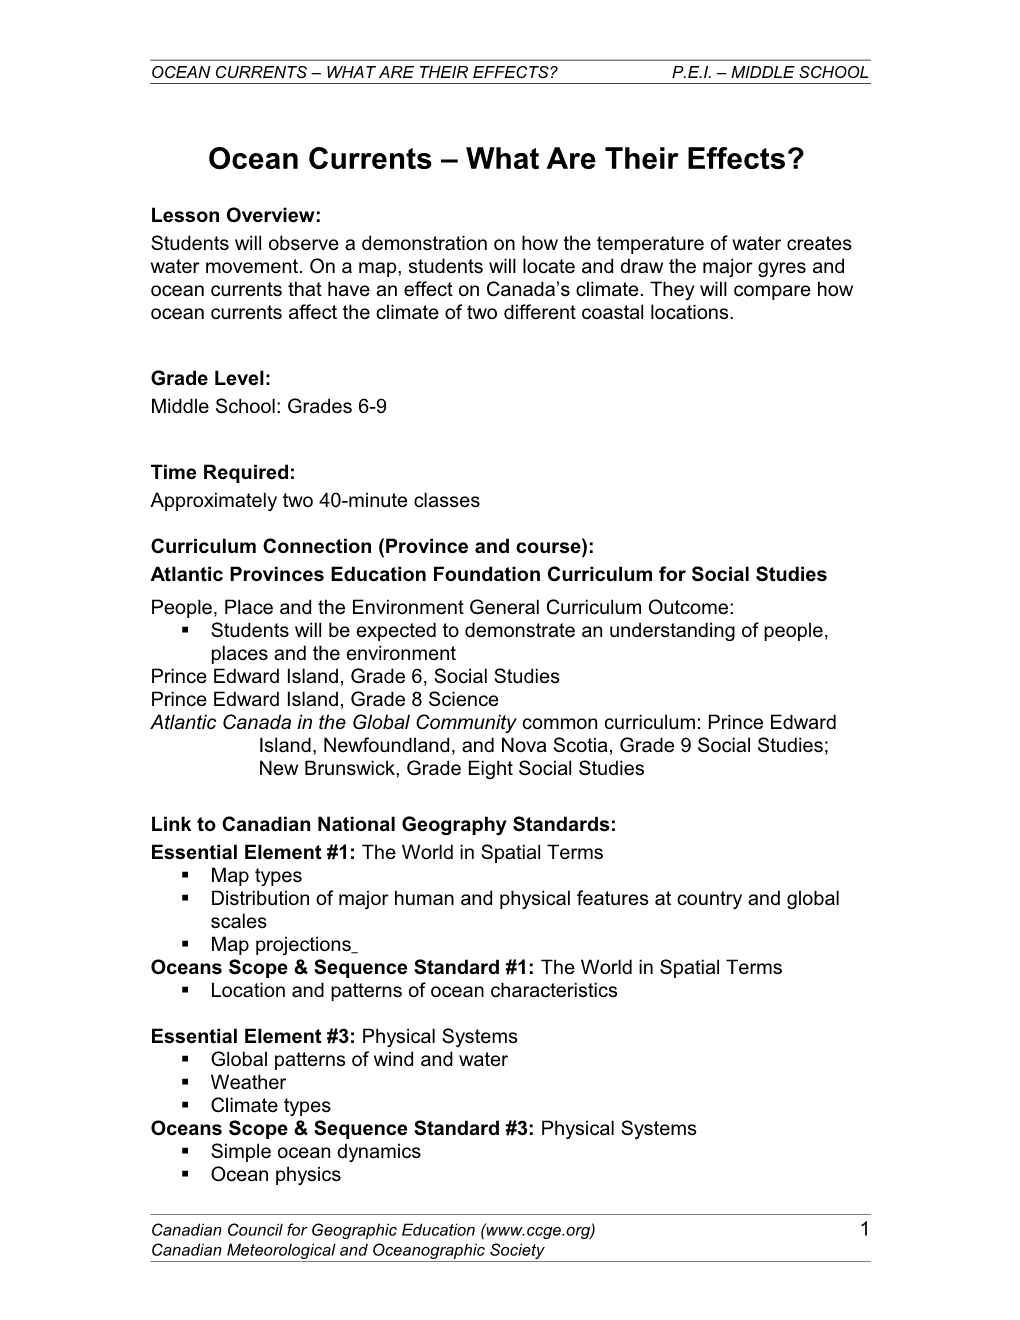 Ocean Currents What Are Their Effects? P.E.I. Middle School